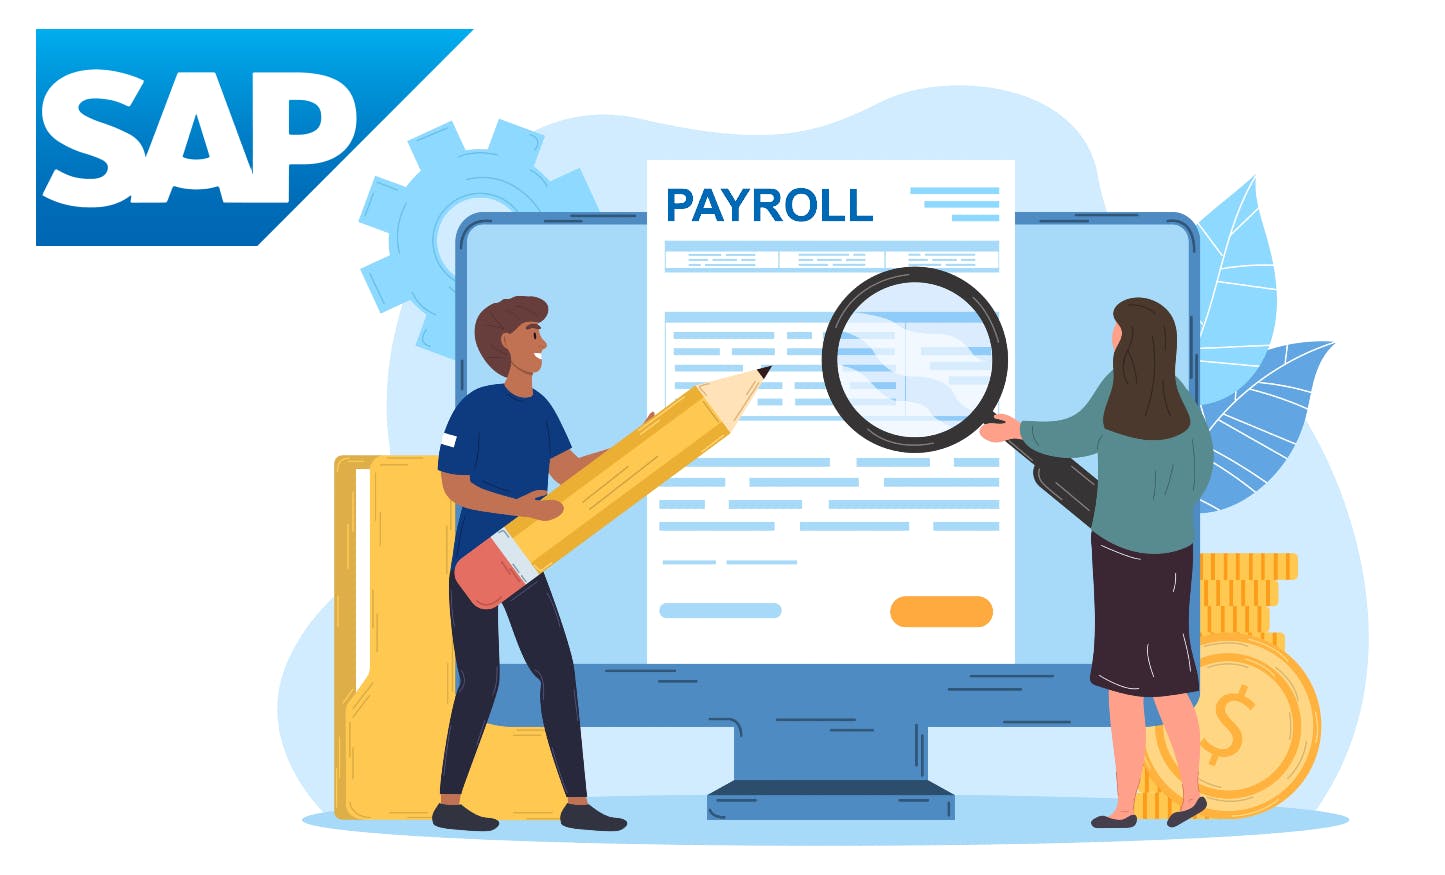 SAP Payroll Review: Features, Pros & Cons, and Alternatives!